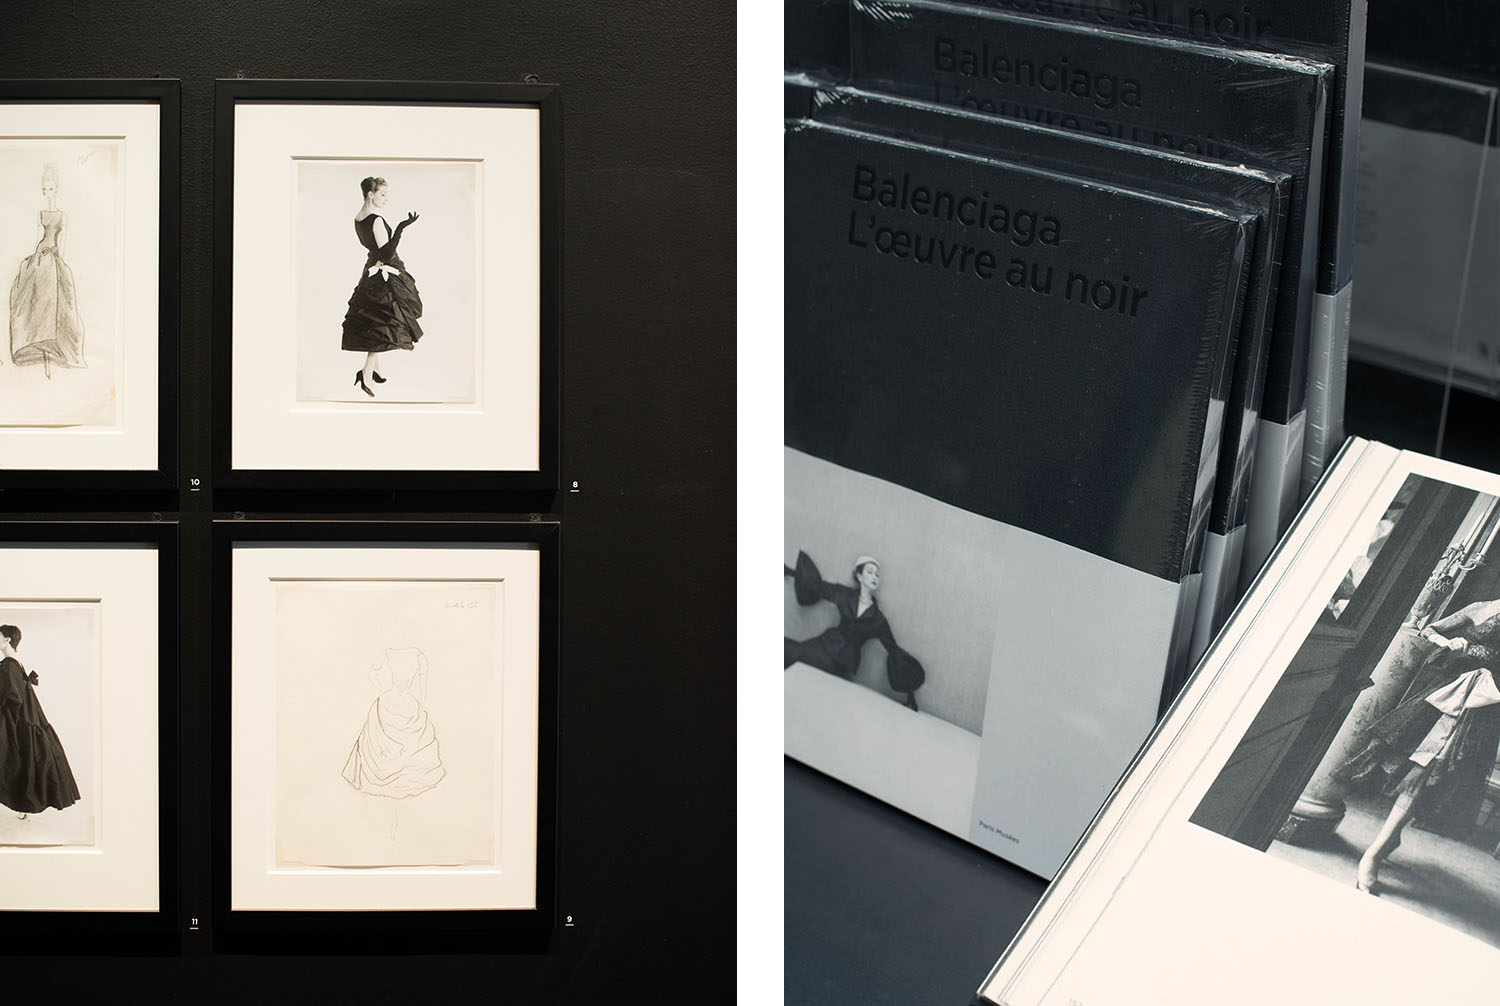 Sketches, photos and books at the Balenciaga: L'Oeuvre au noir exhibit, captured by travel blogger Cee Fardoe of Coco & Vera